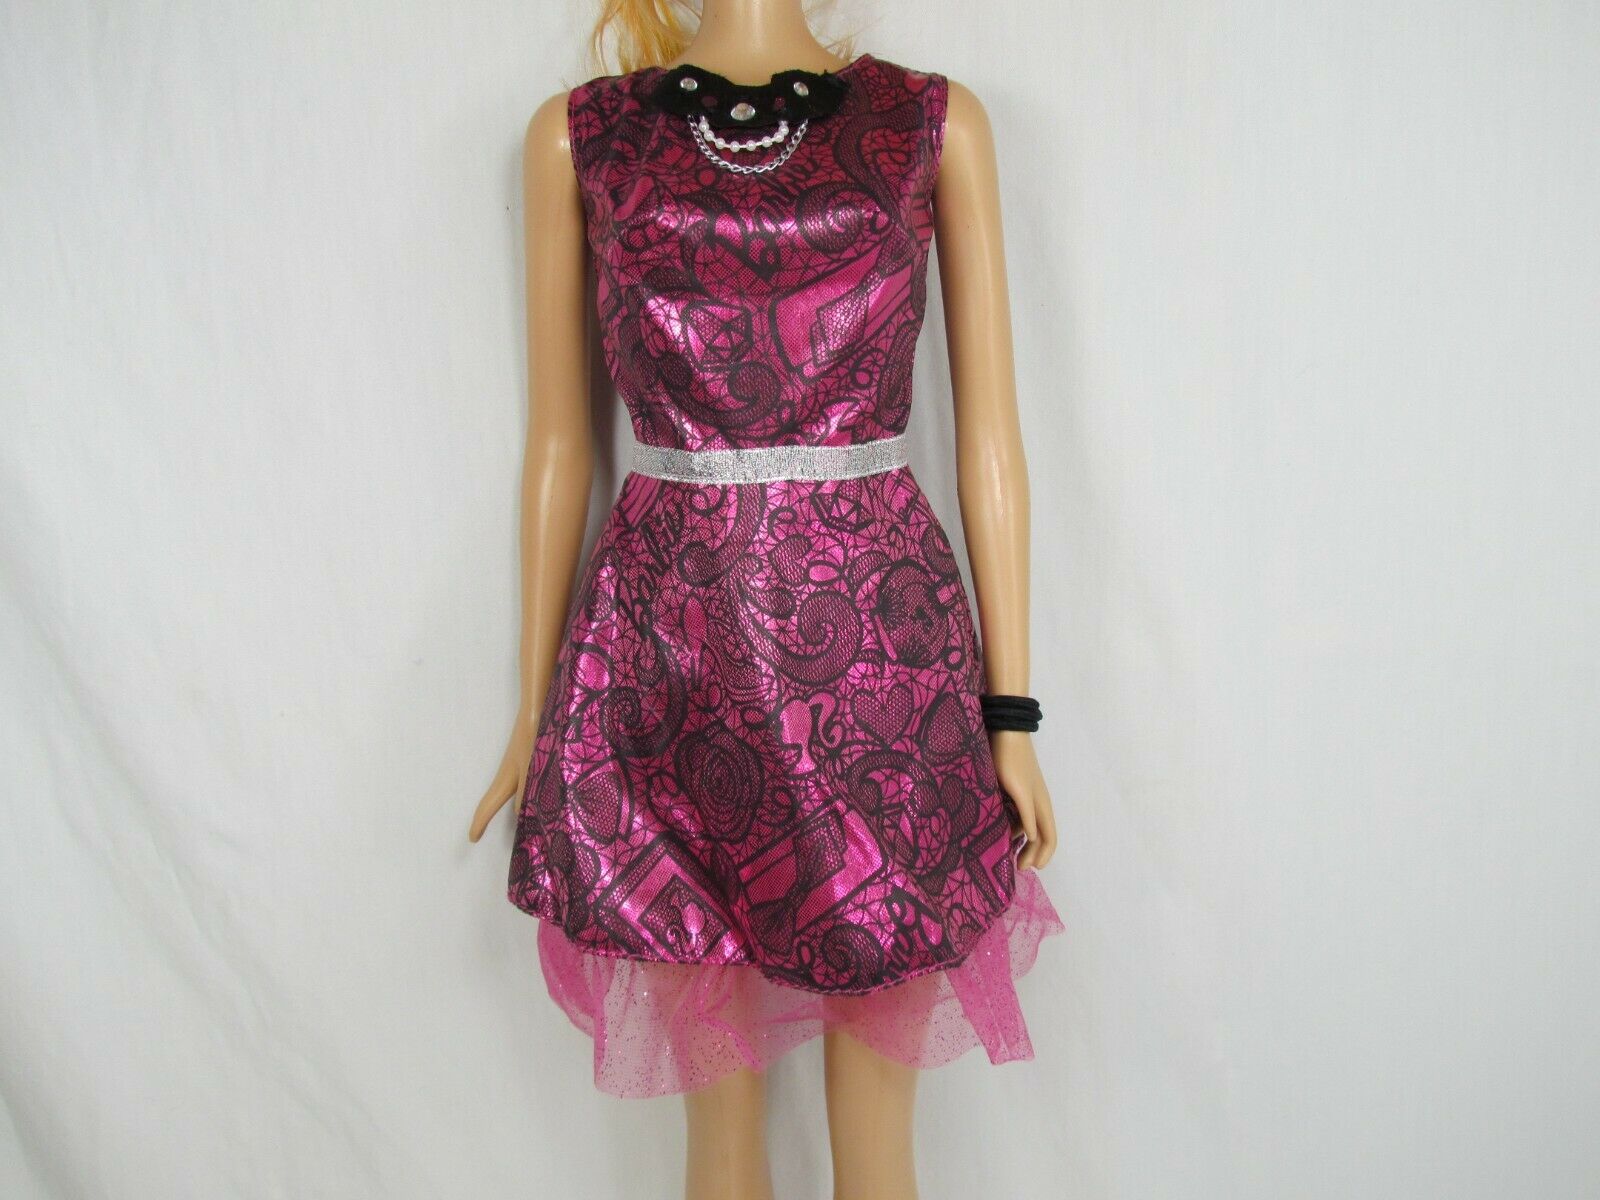 Barbie's My Size 28" Doll Pretty Pink Dress With Embellishments Along The Collar